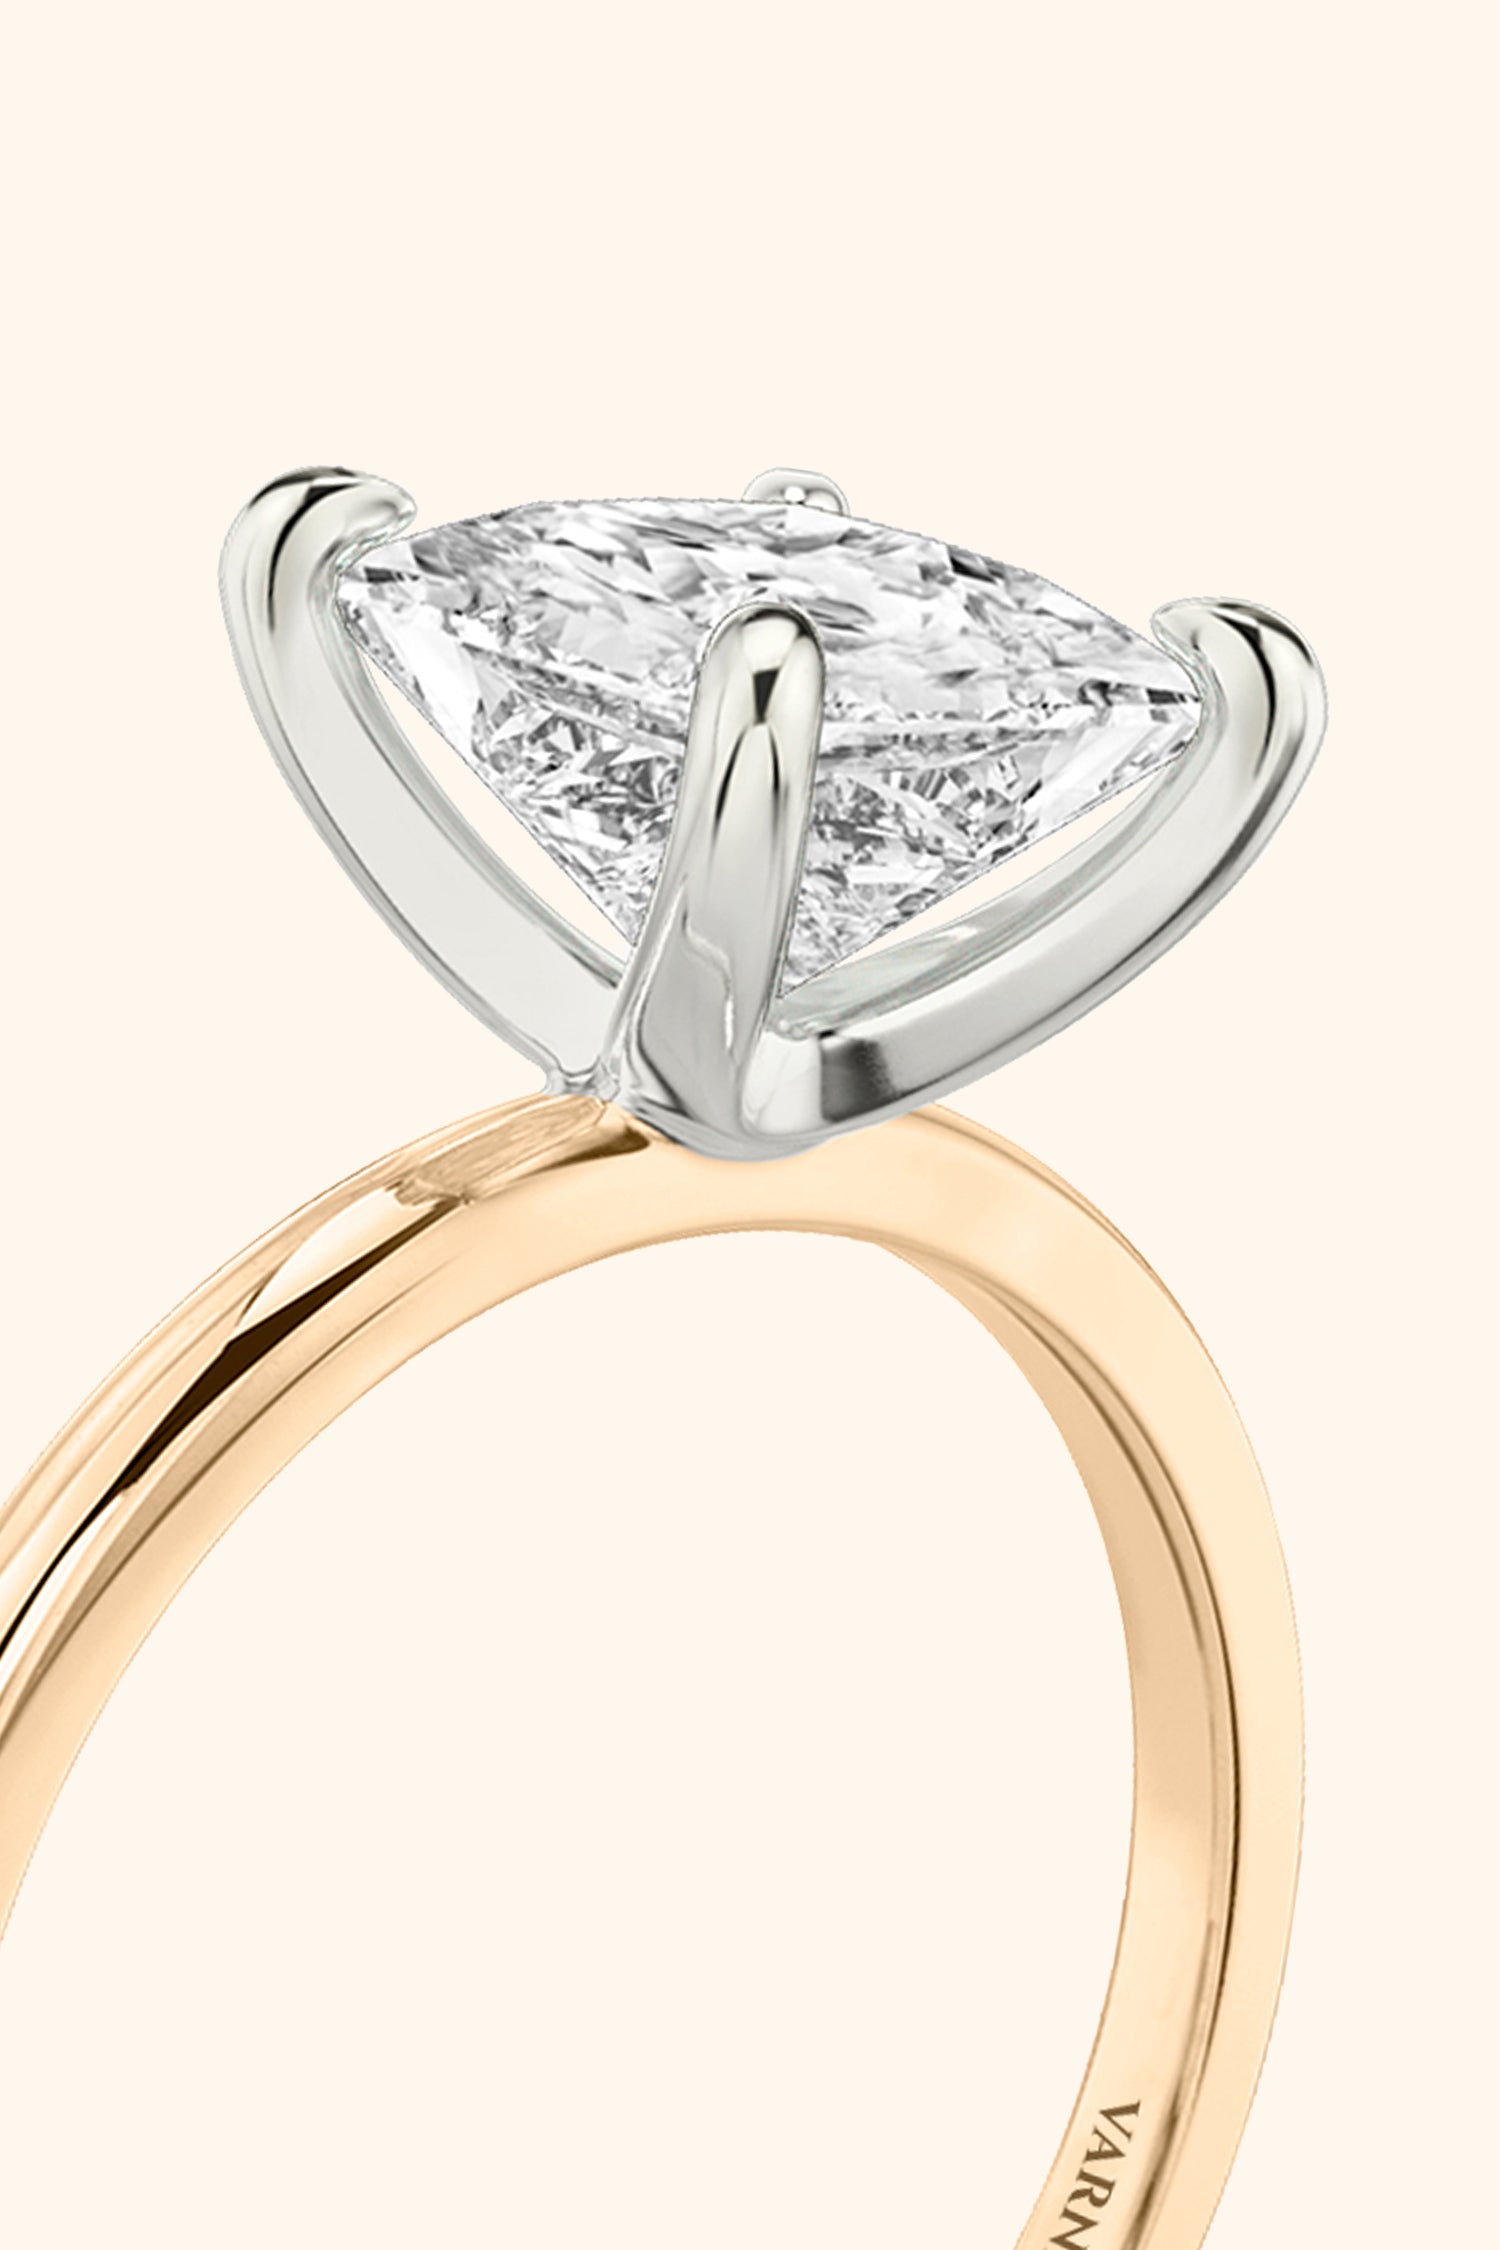 Dual Tone Glance Pavé Ring with Princess Solitaire